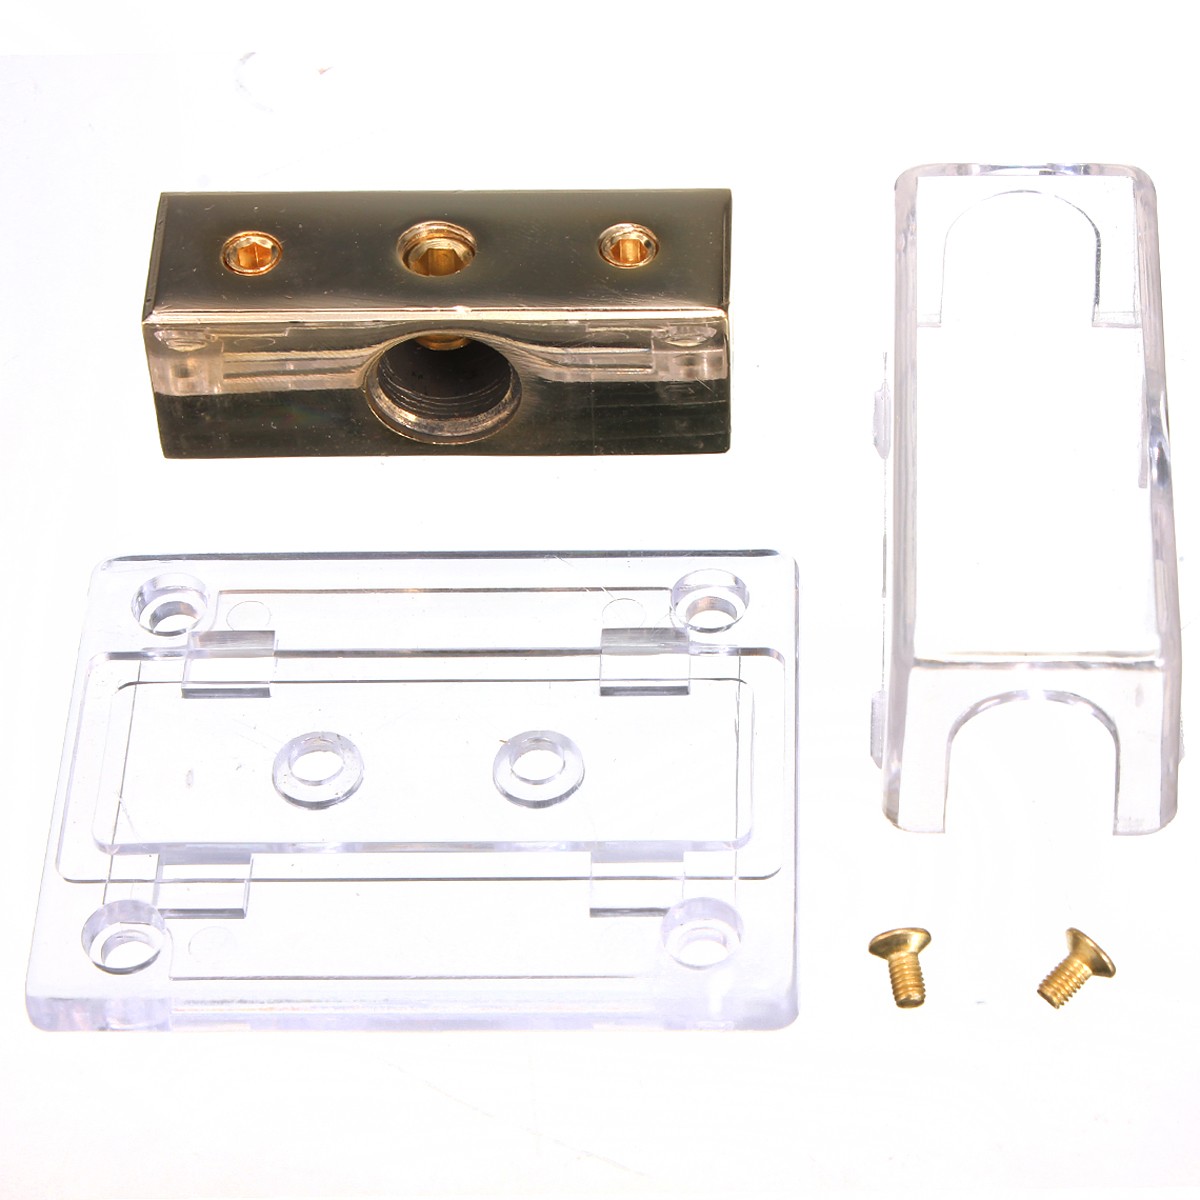 2-Way Solid Metal Power Distribution Block Splitter Gold-Plated For Cars Boats